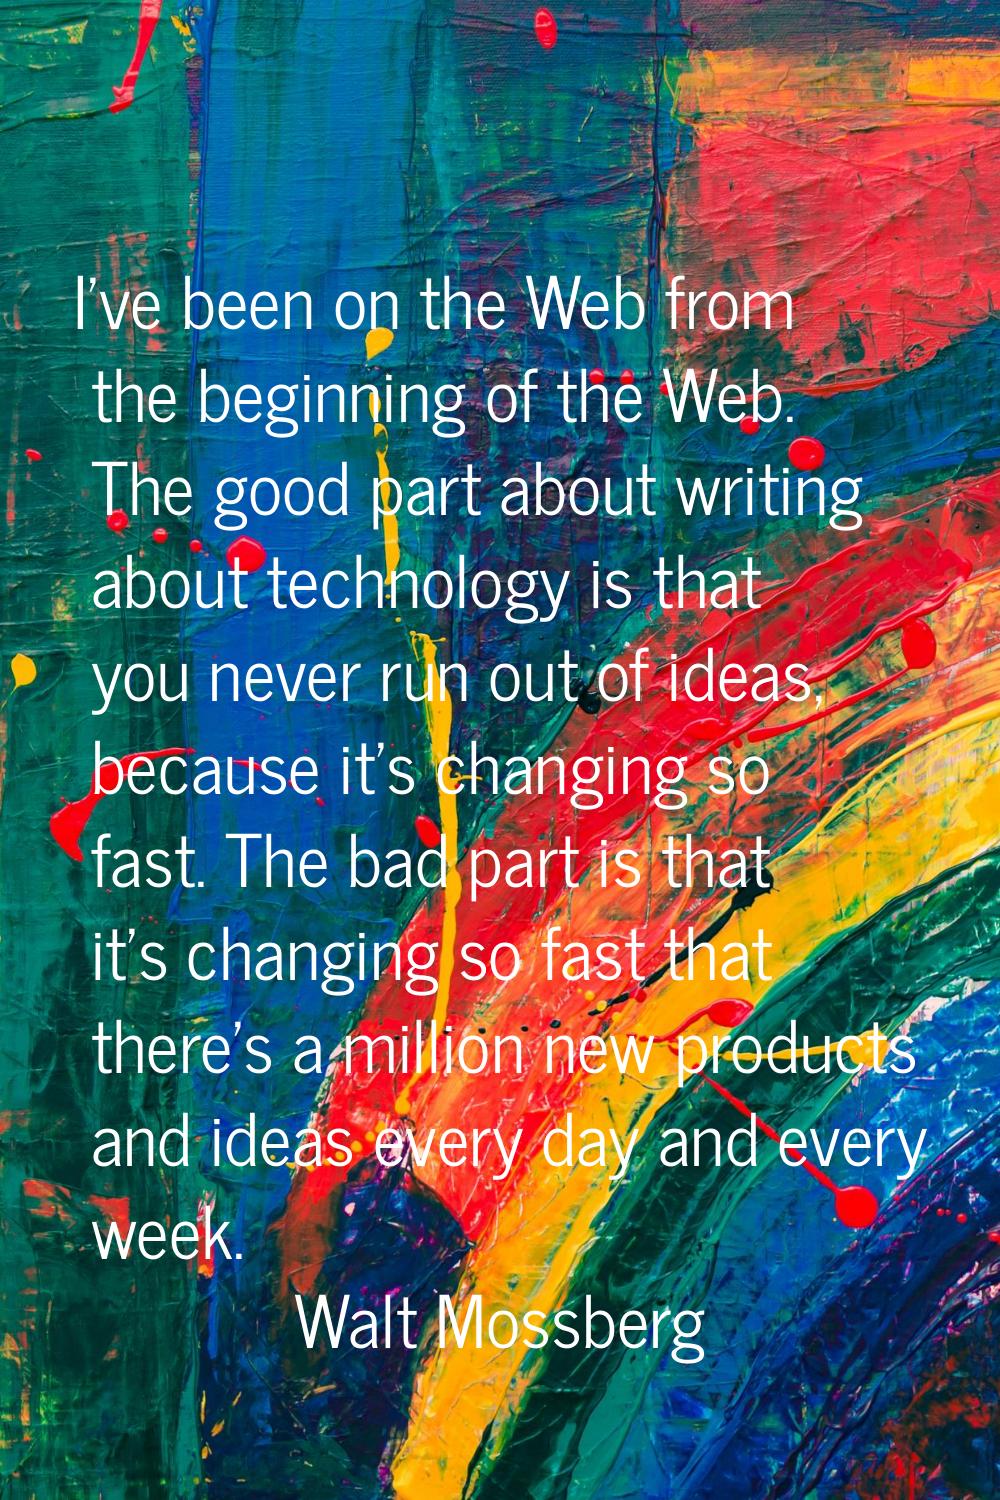 I've been on the Web from the beginning of the Web. The good part about writing about technology is